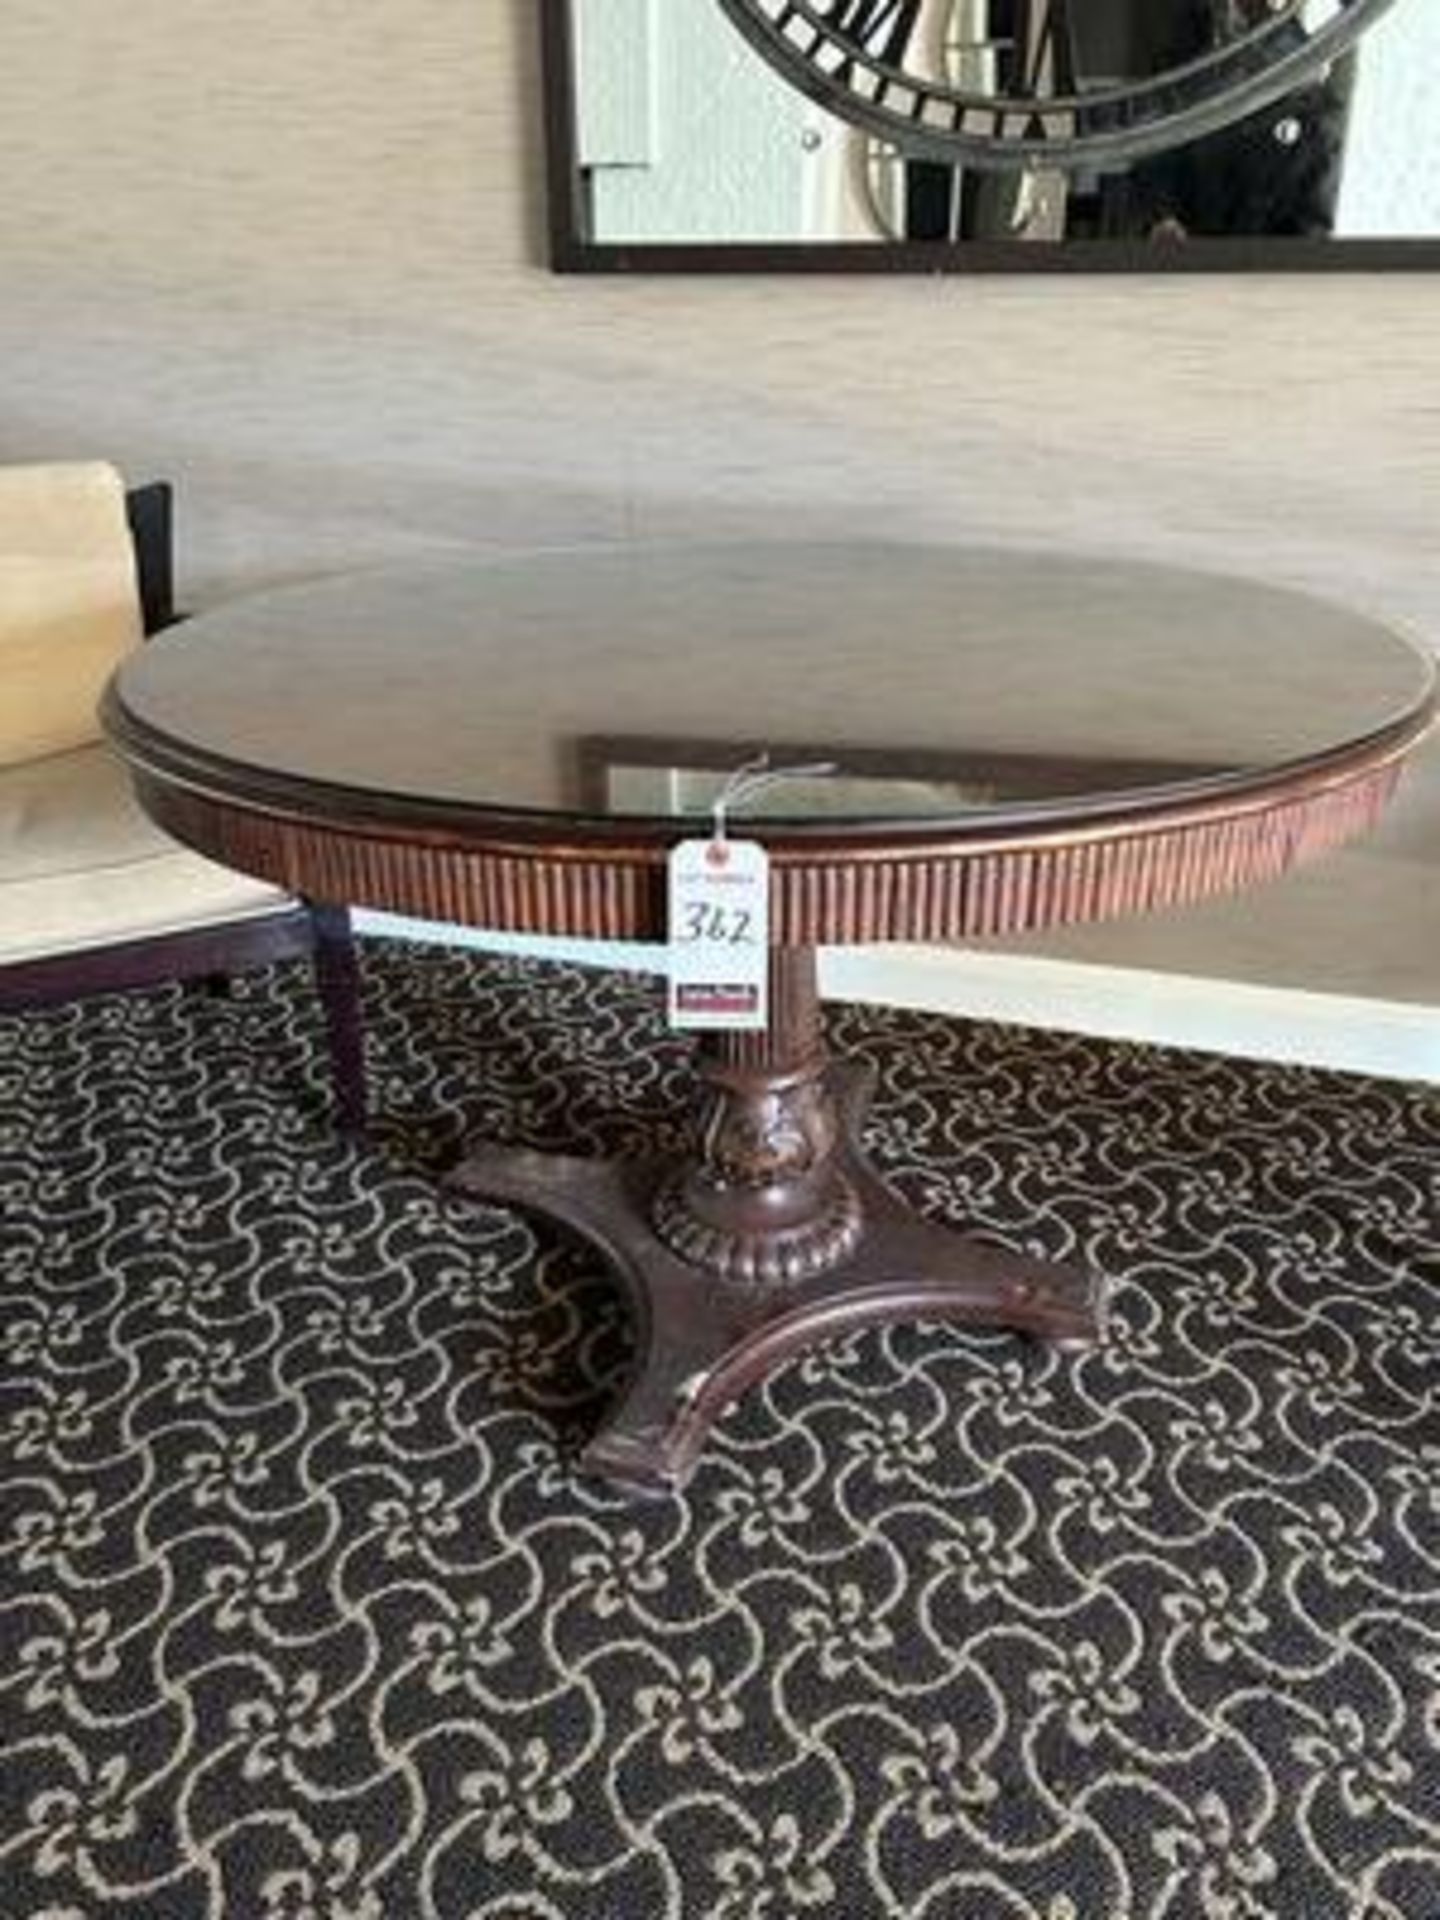 48" DIA. S.P. WOOD TABLE W/ GLASS TOP